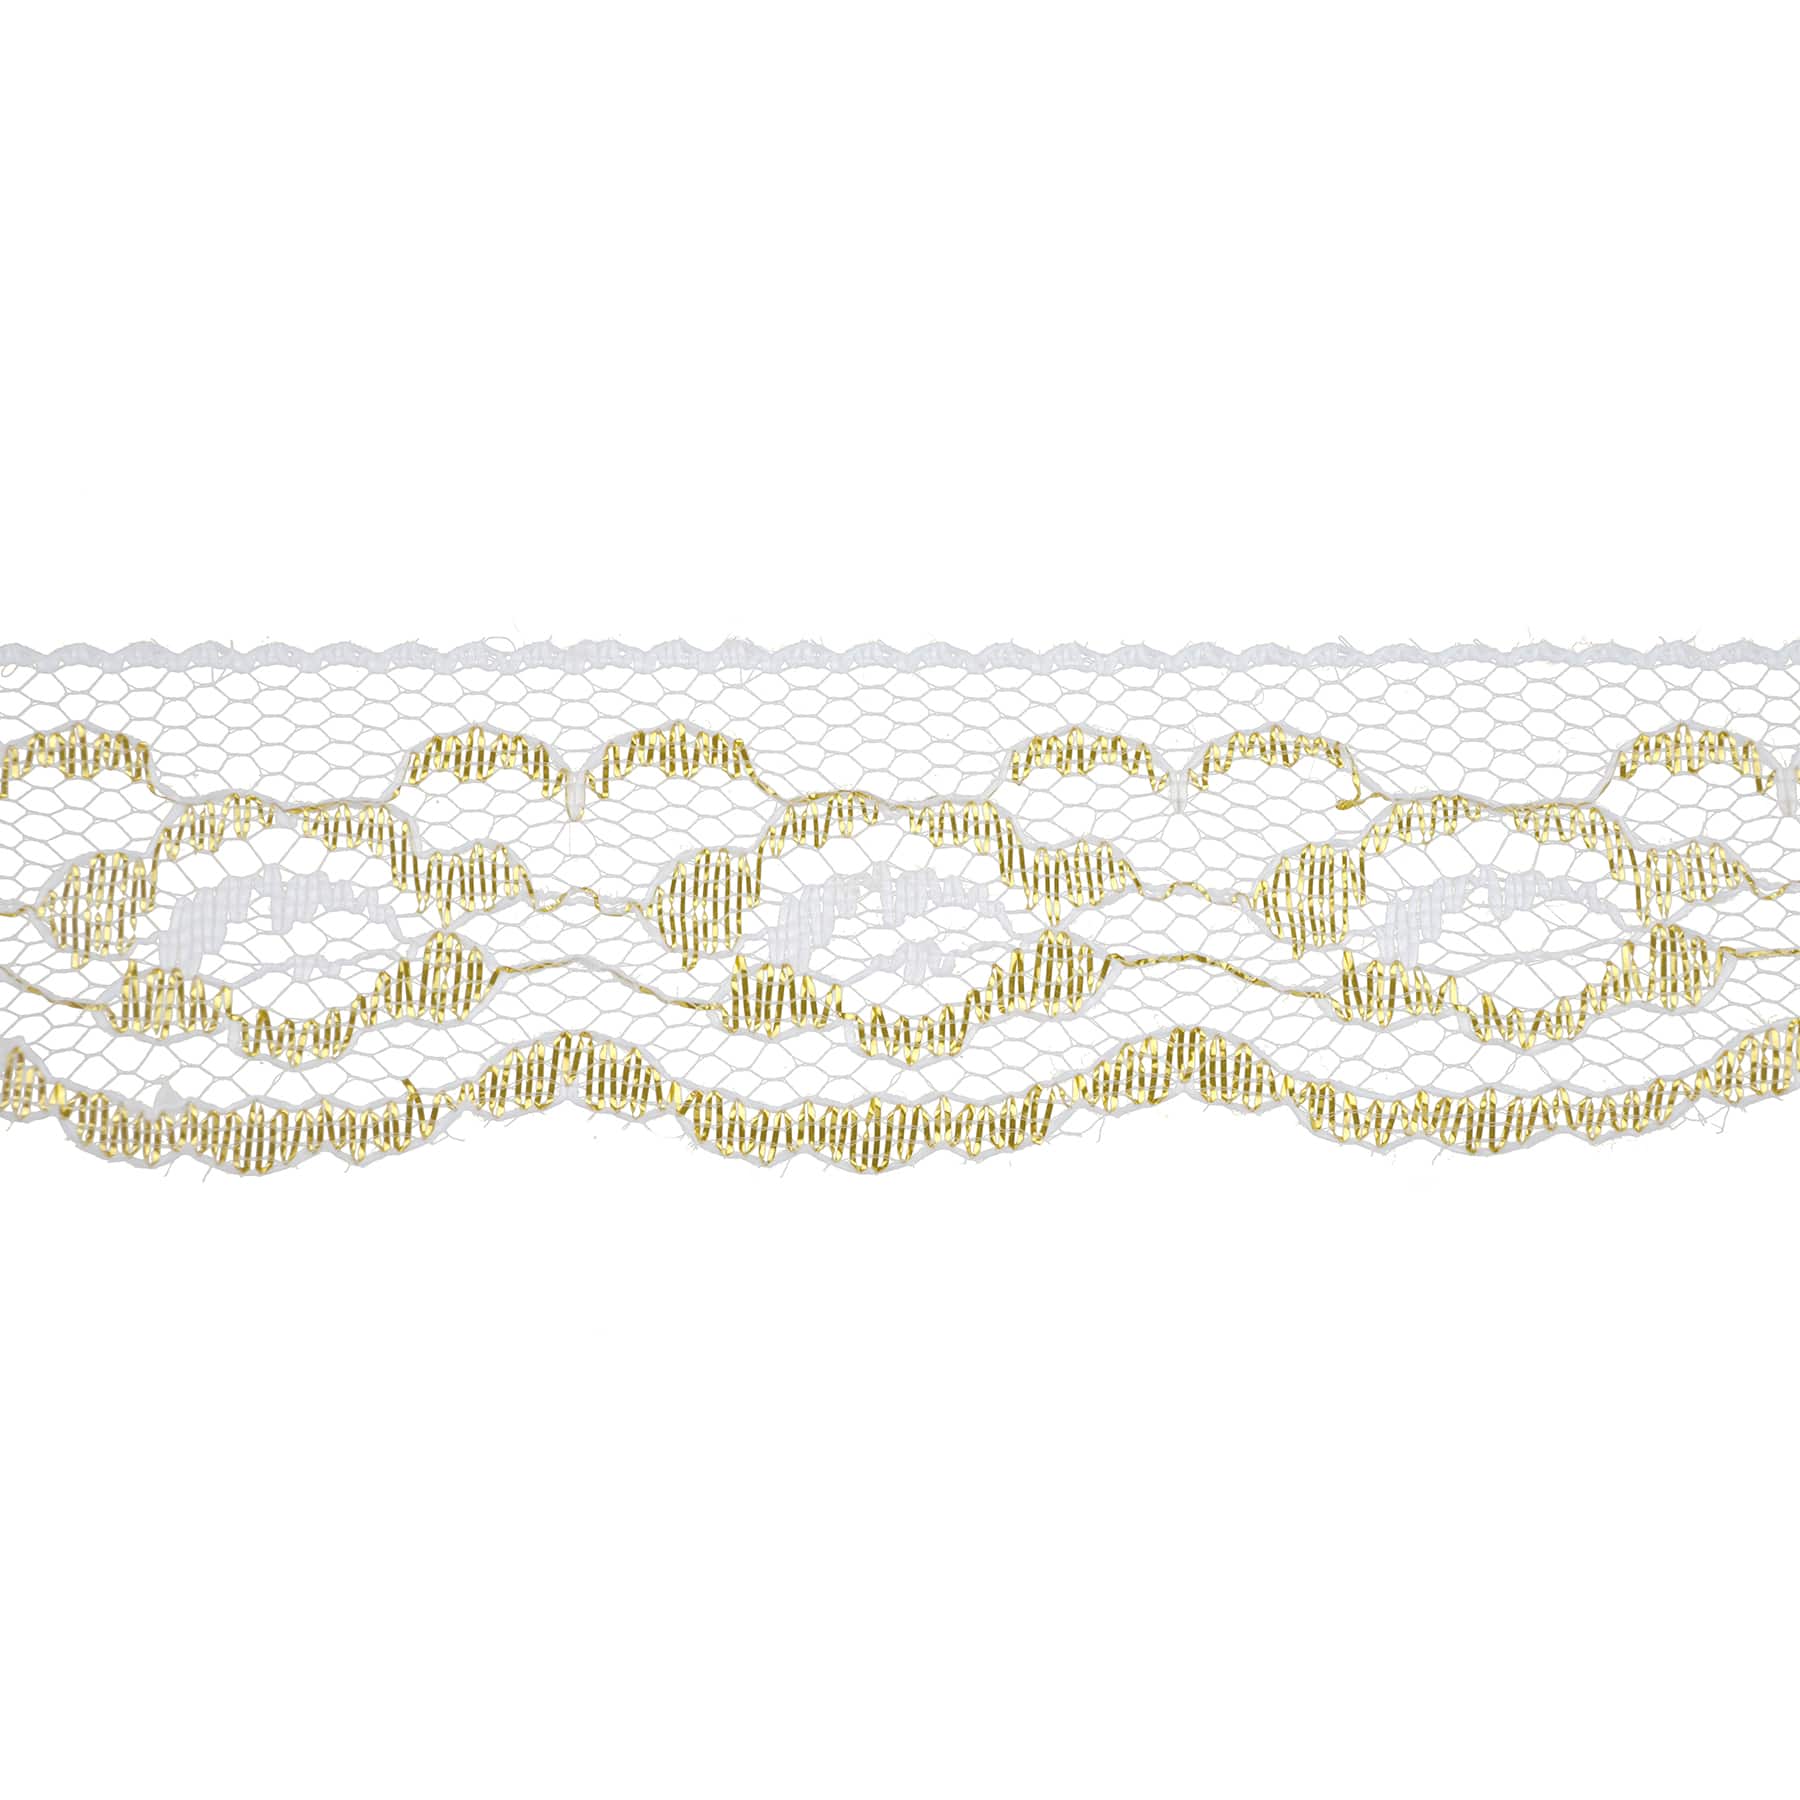 1.25'' x 3 yd. White and Gold Lace Trim Ribbon by Celebrate It